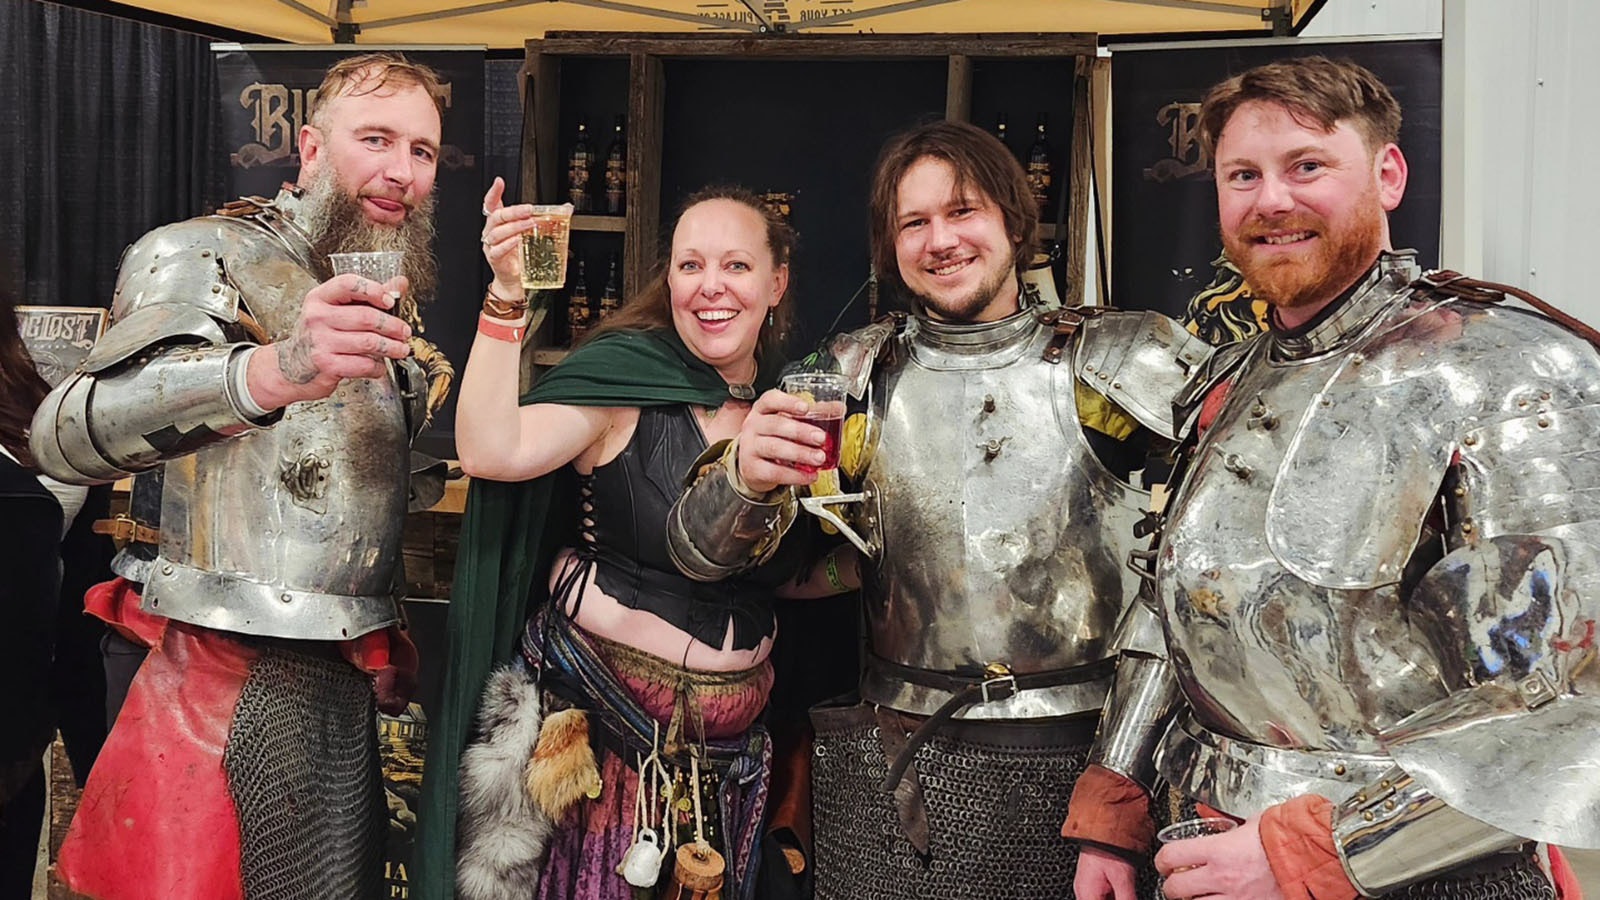 The Knights of Valor unwind at Big Lost Meadery after a long day on the field of battle.